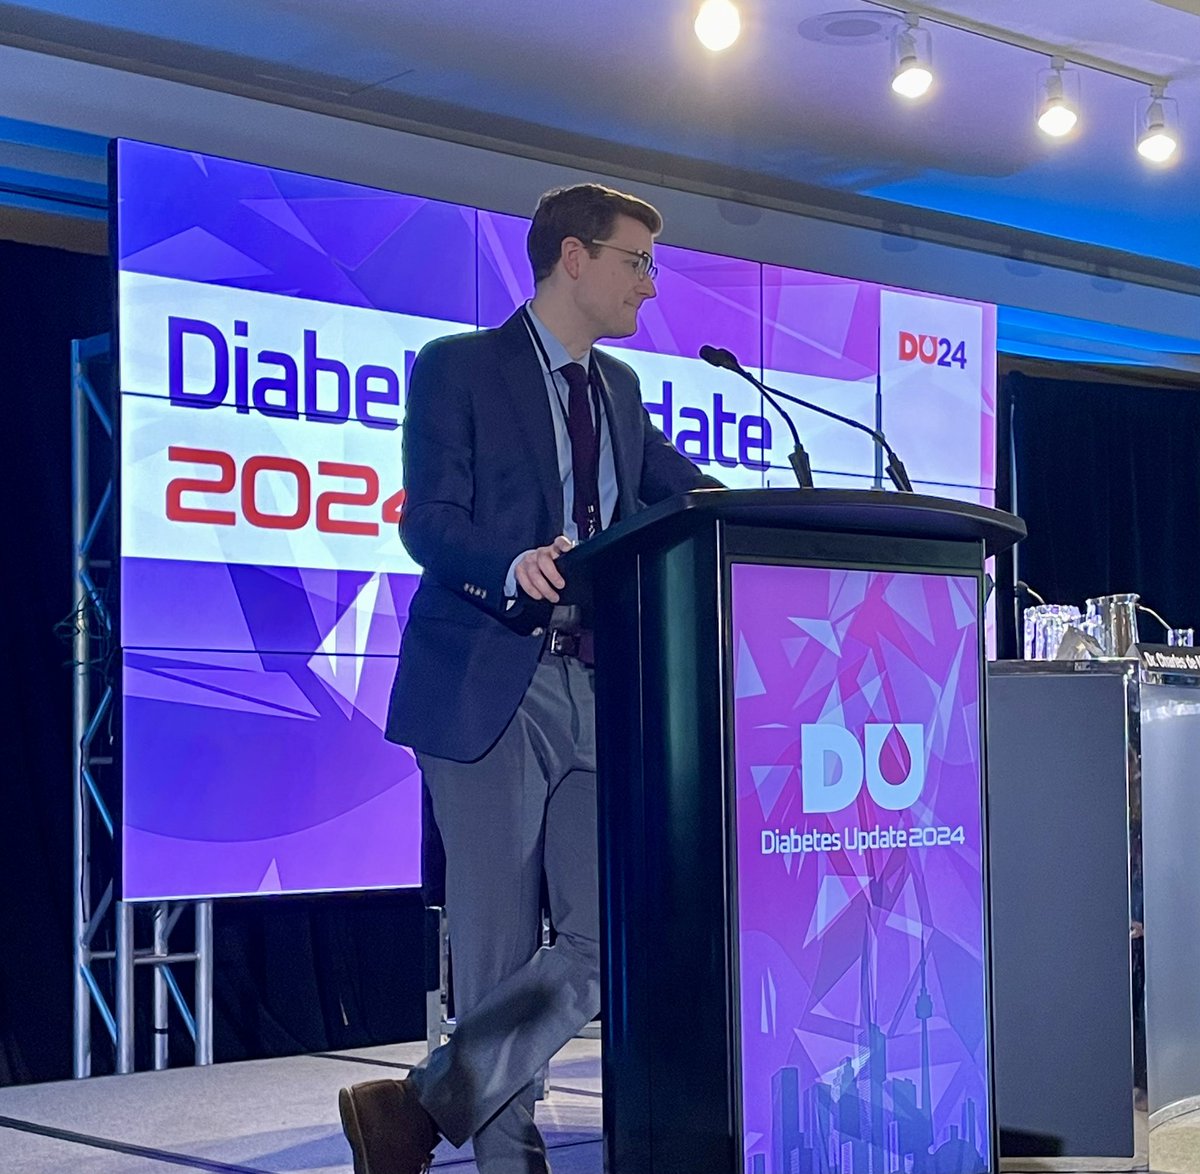 DAC researcher @vasc_surg is presenting his work on collaborative care for diabetes-related foot care at #DUCongress24 today. Preventative care reduces amputation risk and improves outcomes for everyone.